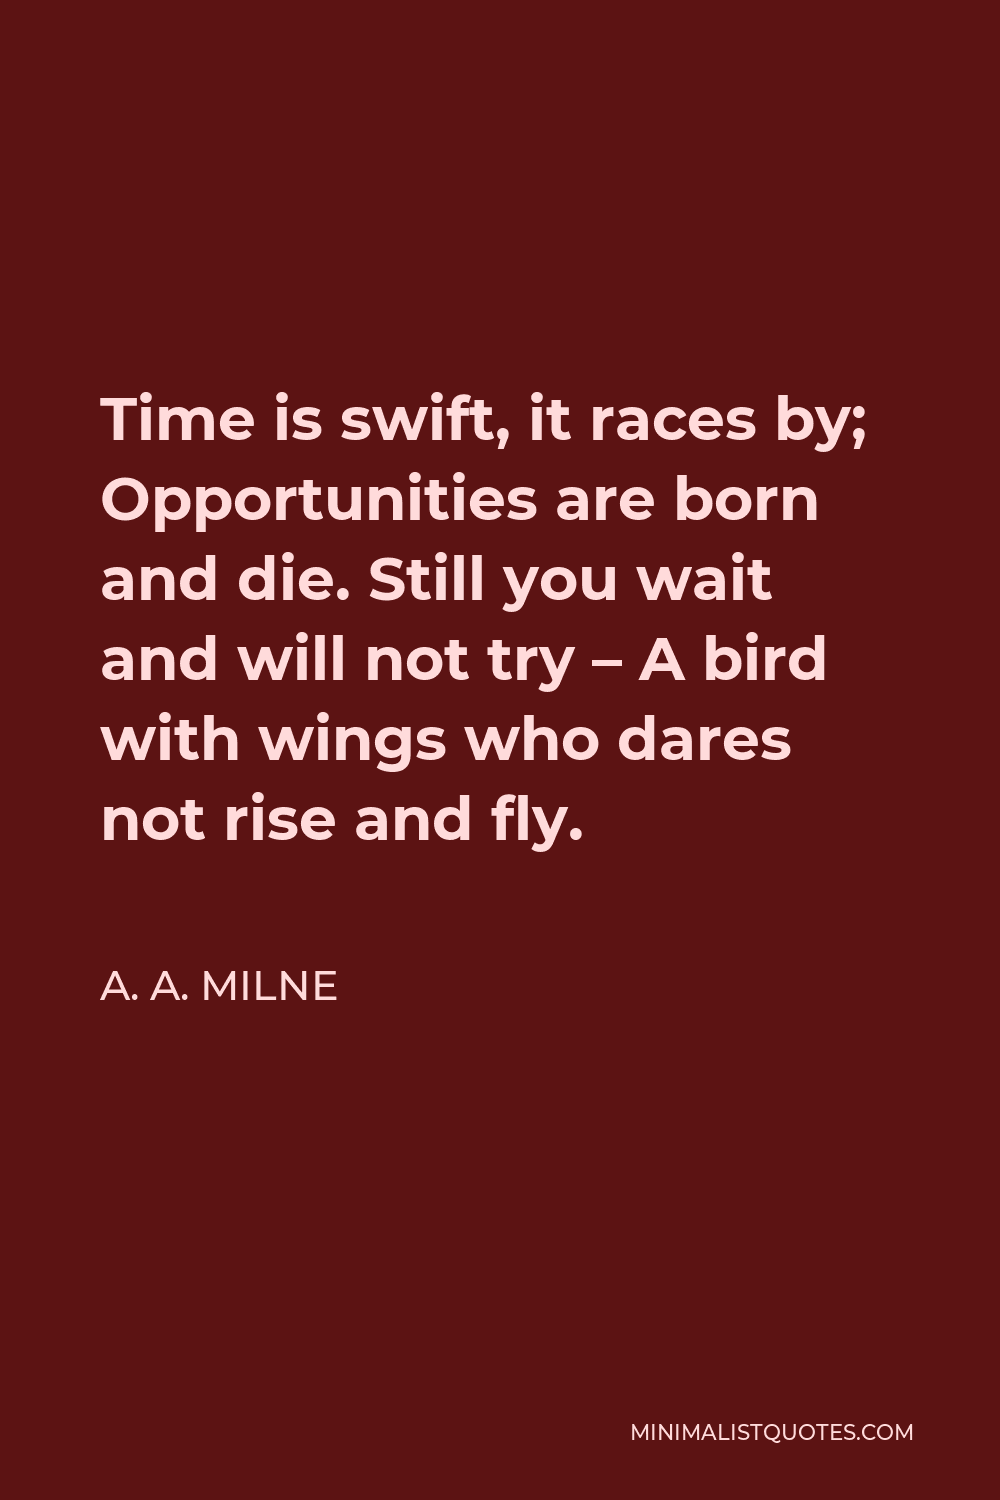 A. A. Milne Quote - Time is swift, it races by; Opportunities are born and die. Still you wait and will not try – A bird with wings who dares not rise and fly.